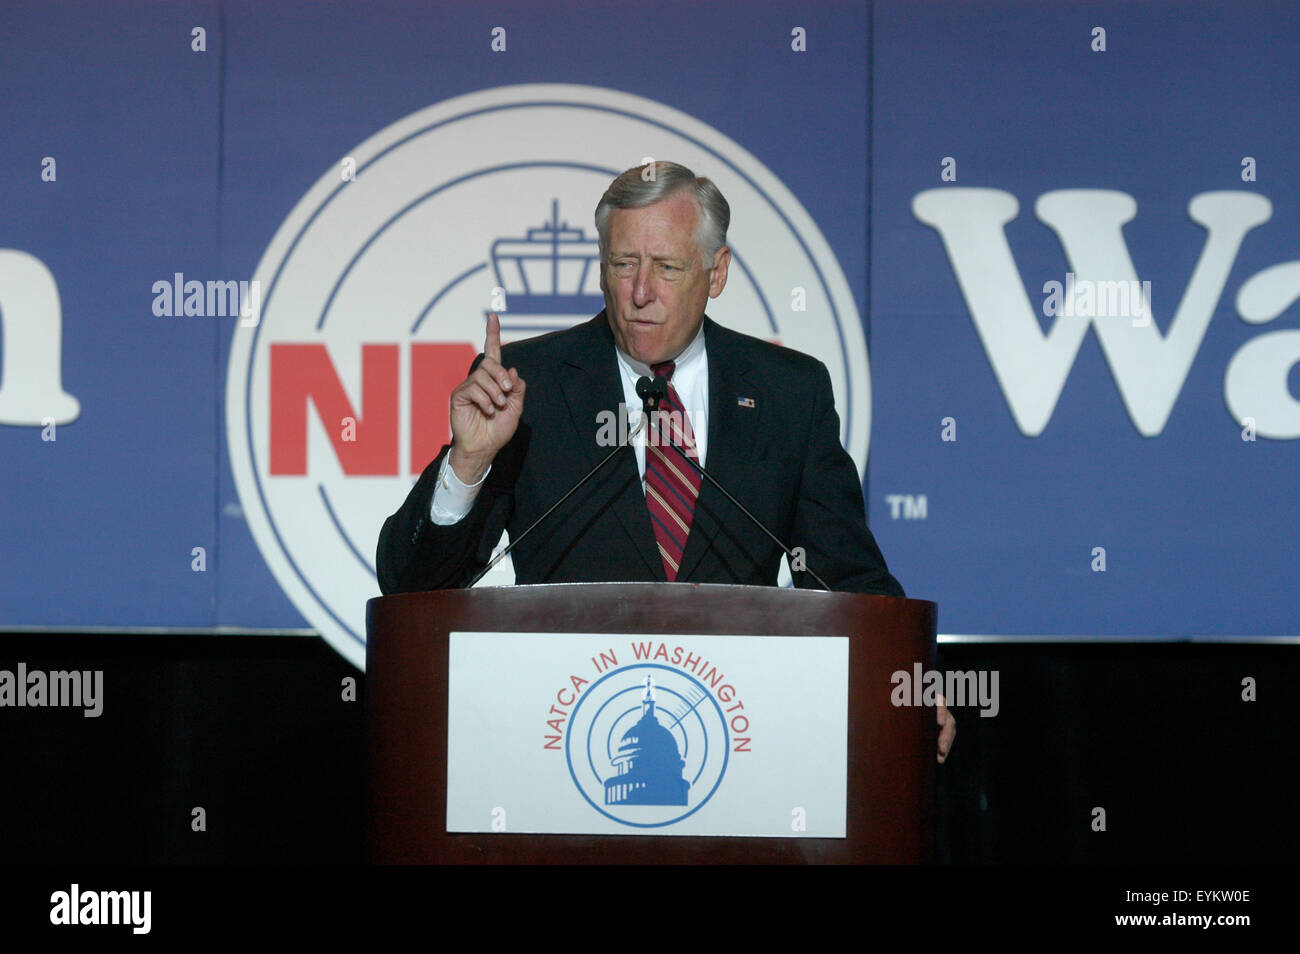 Rep. Steny Hoyer, D-MI, Minority Whip, speaks at the National Air Traffic Controllers Association (NATCA) annual meeting in Washington, D.C.. Stock Photo